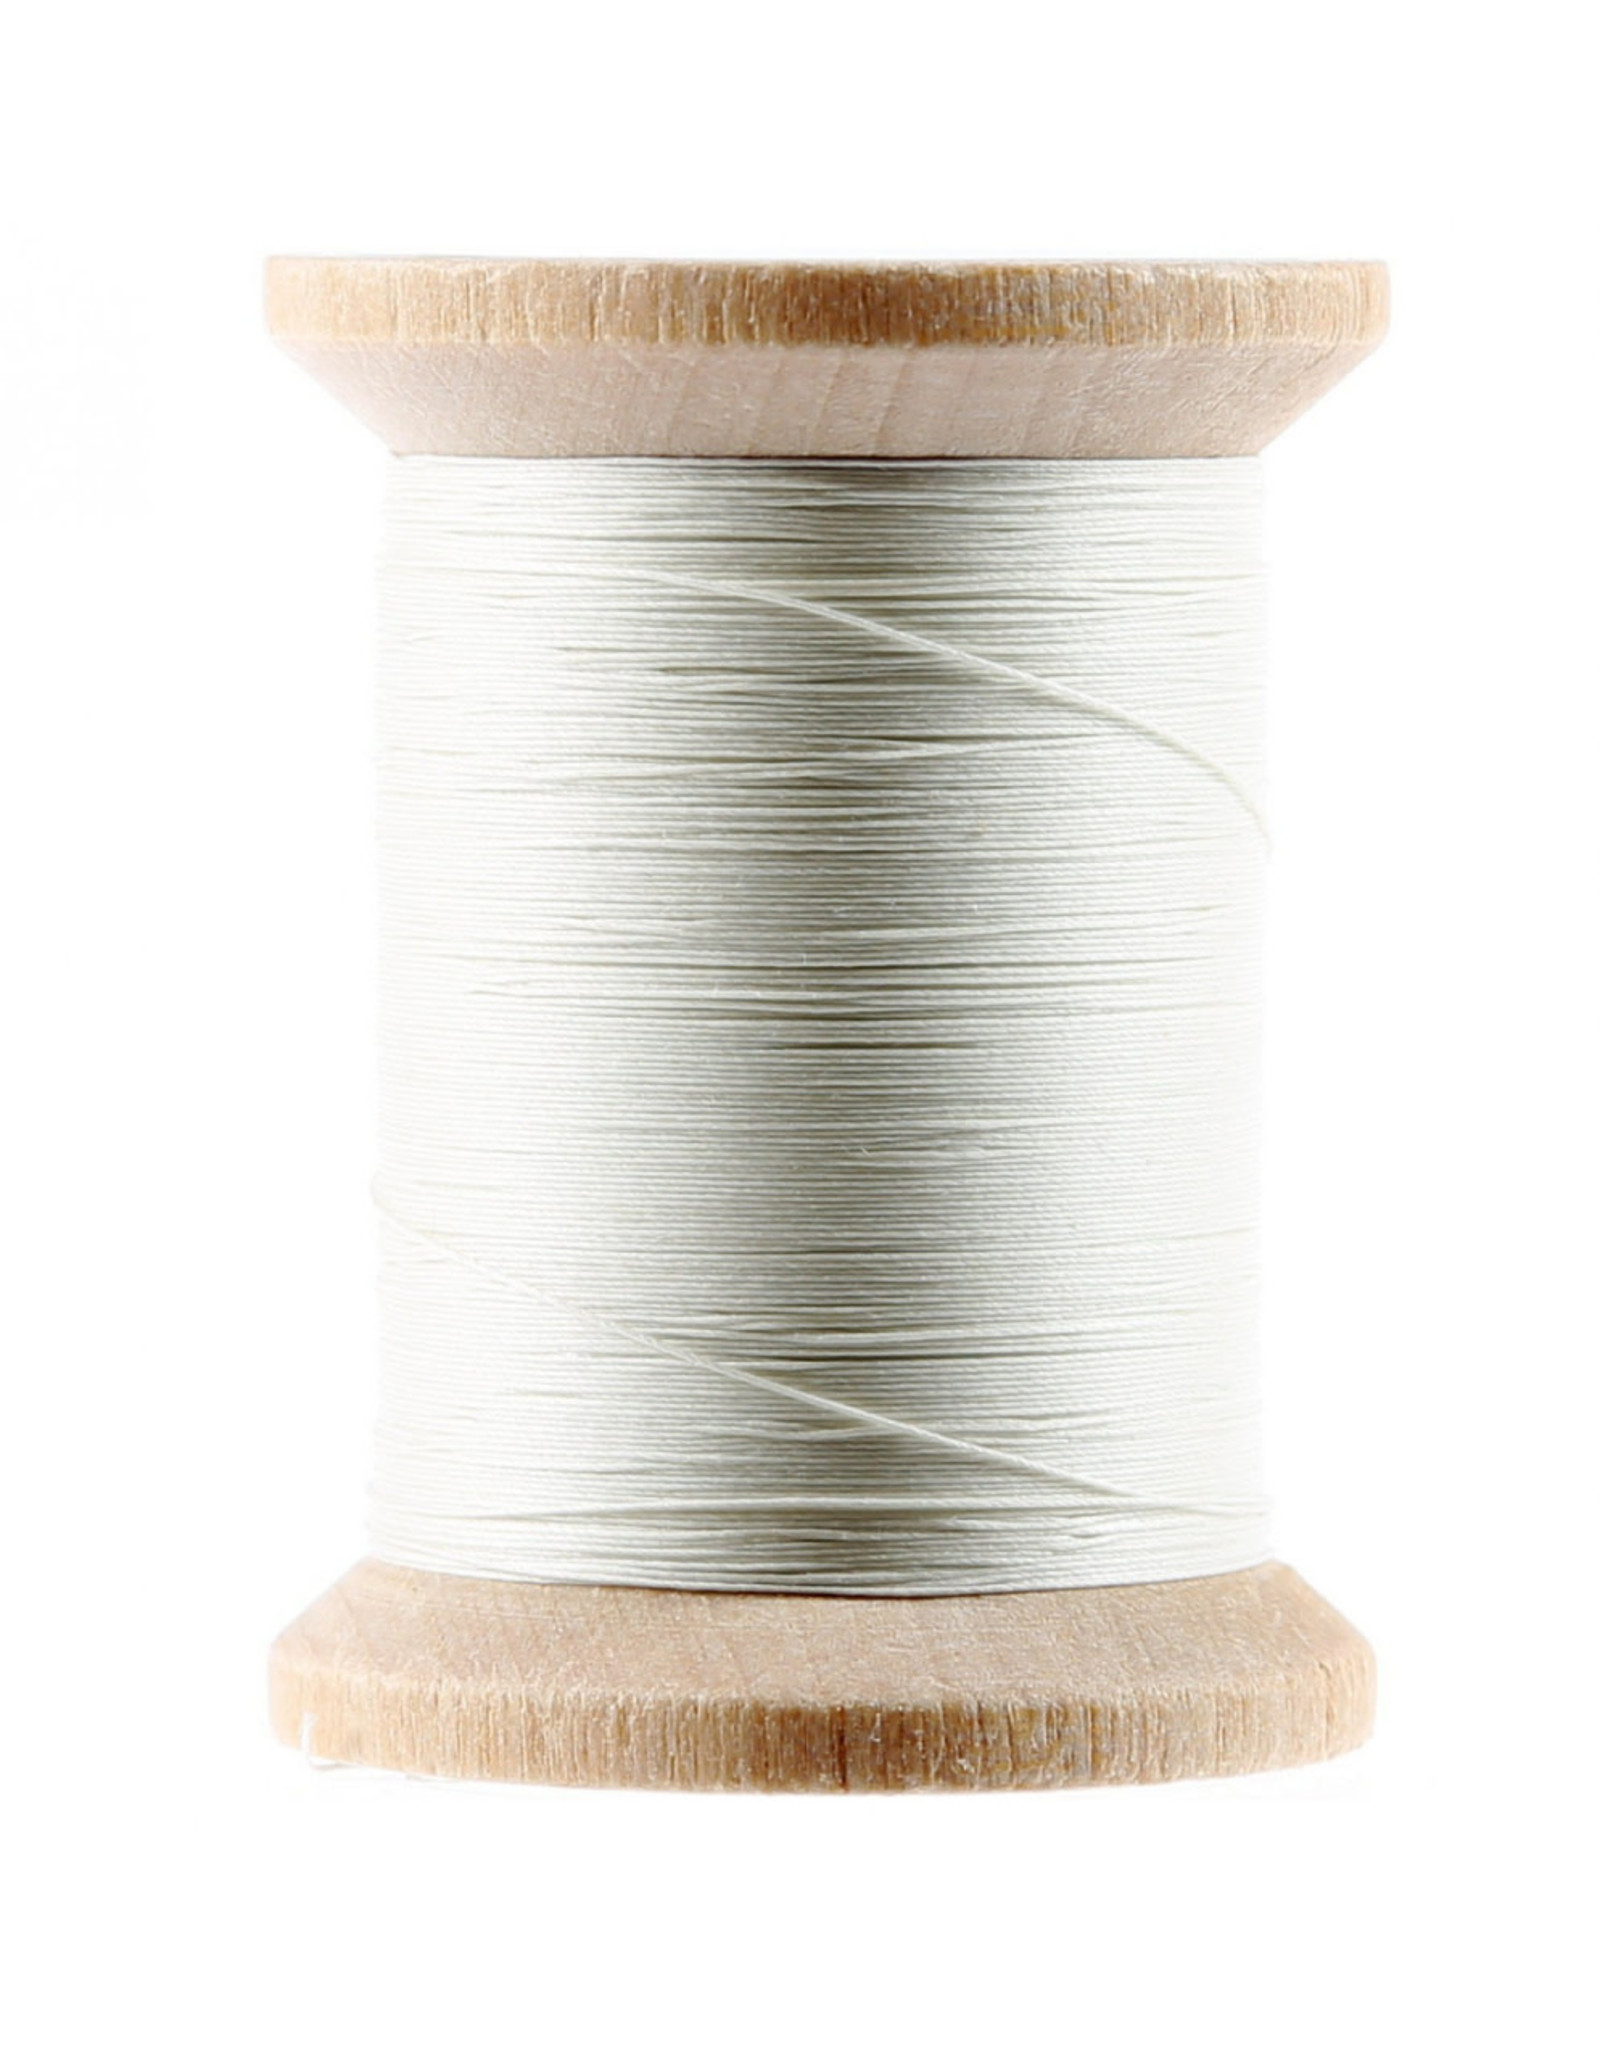 YLI YLI Cotton Hand Quilting Thread, 001 Natural, 40wt, 3 ply, 500 yd spool